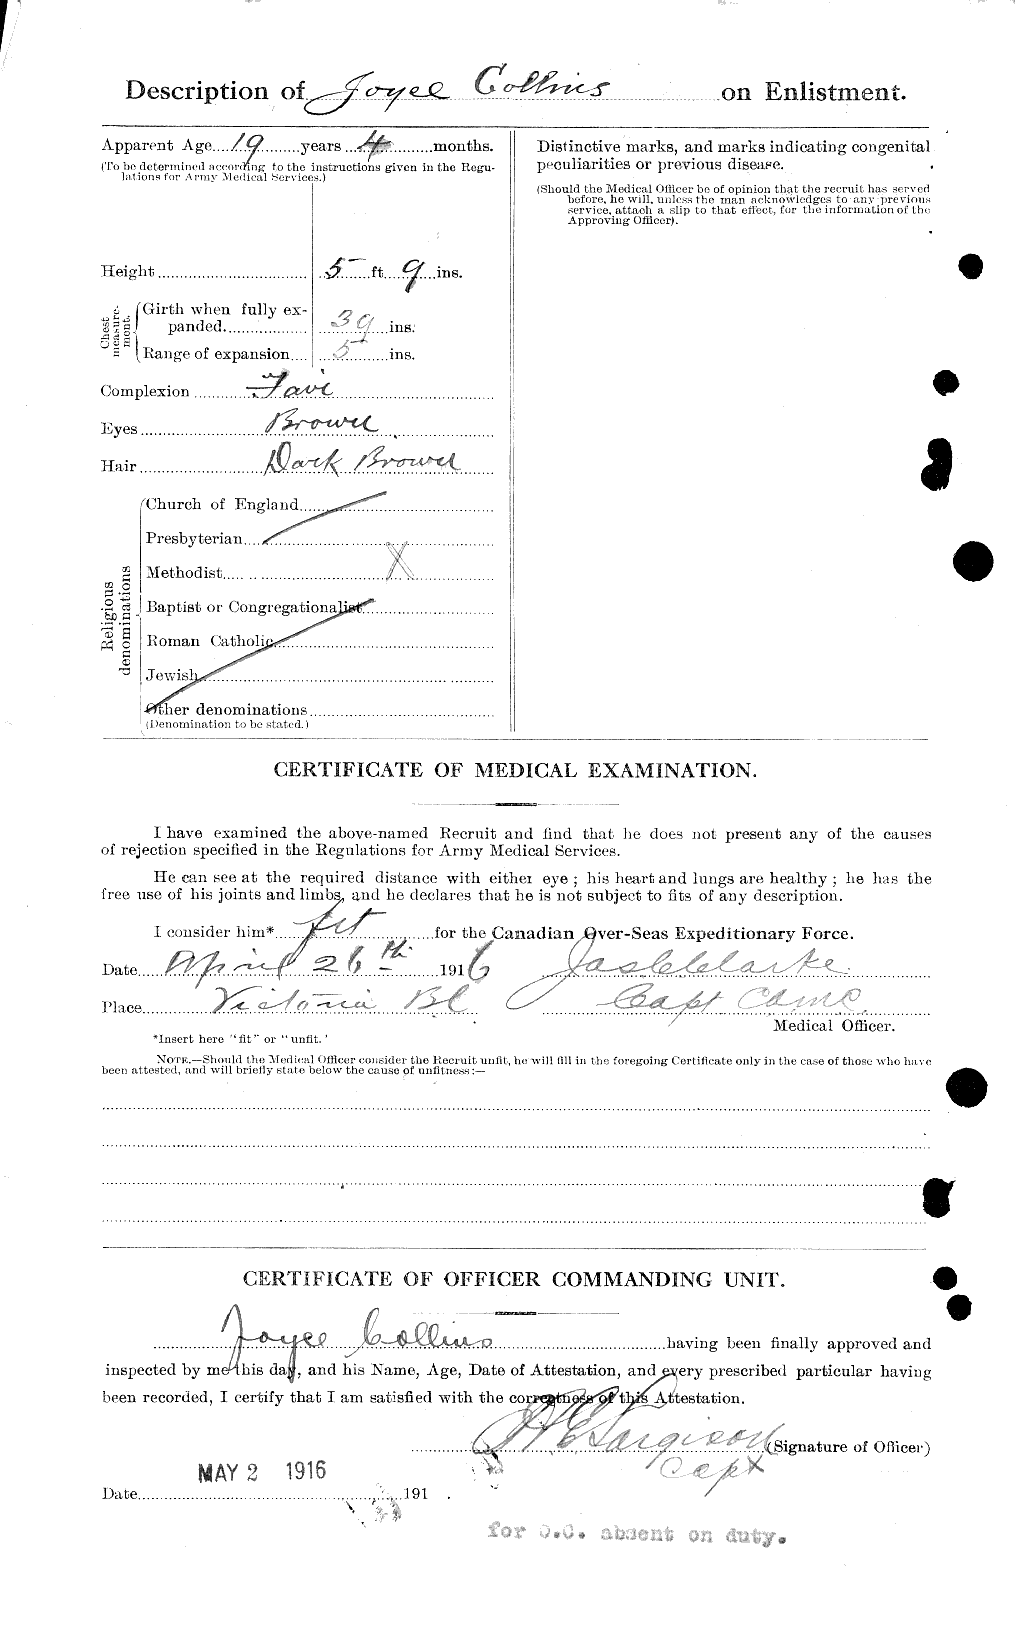 Personnel Records of the First World War - CEF 034431b